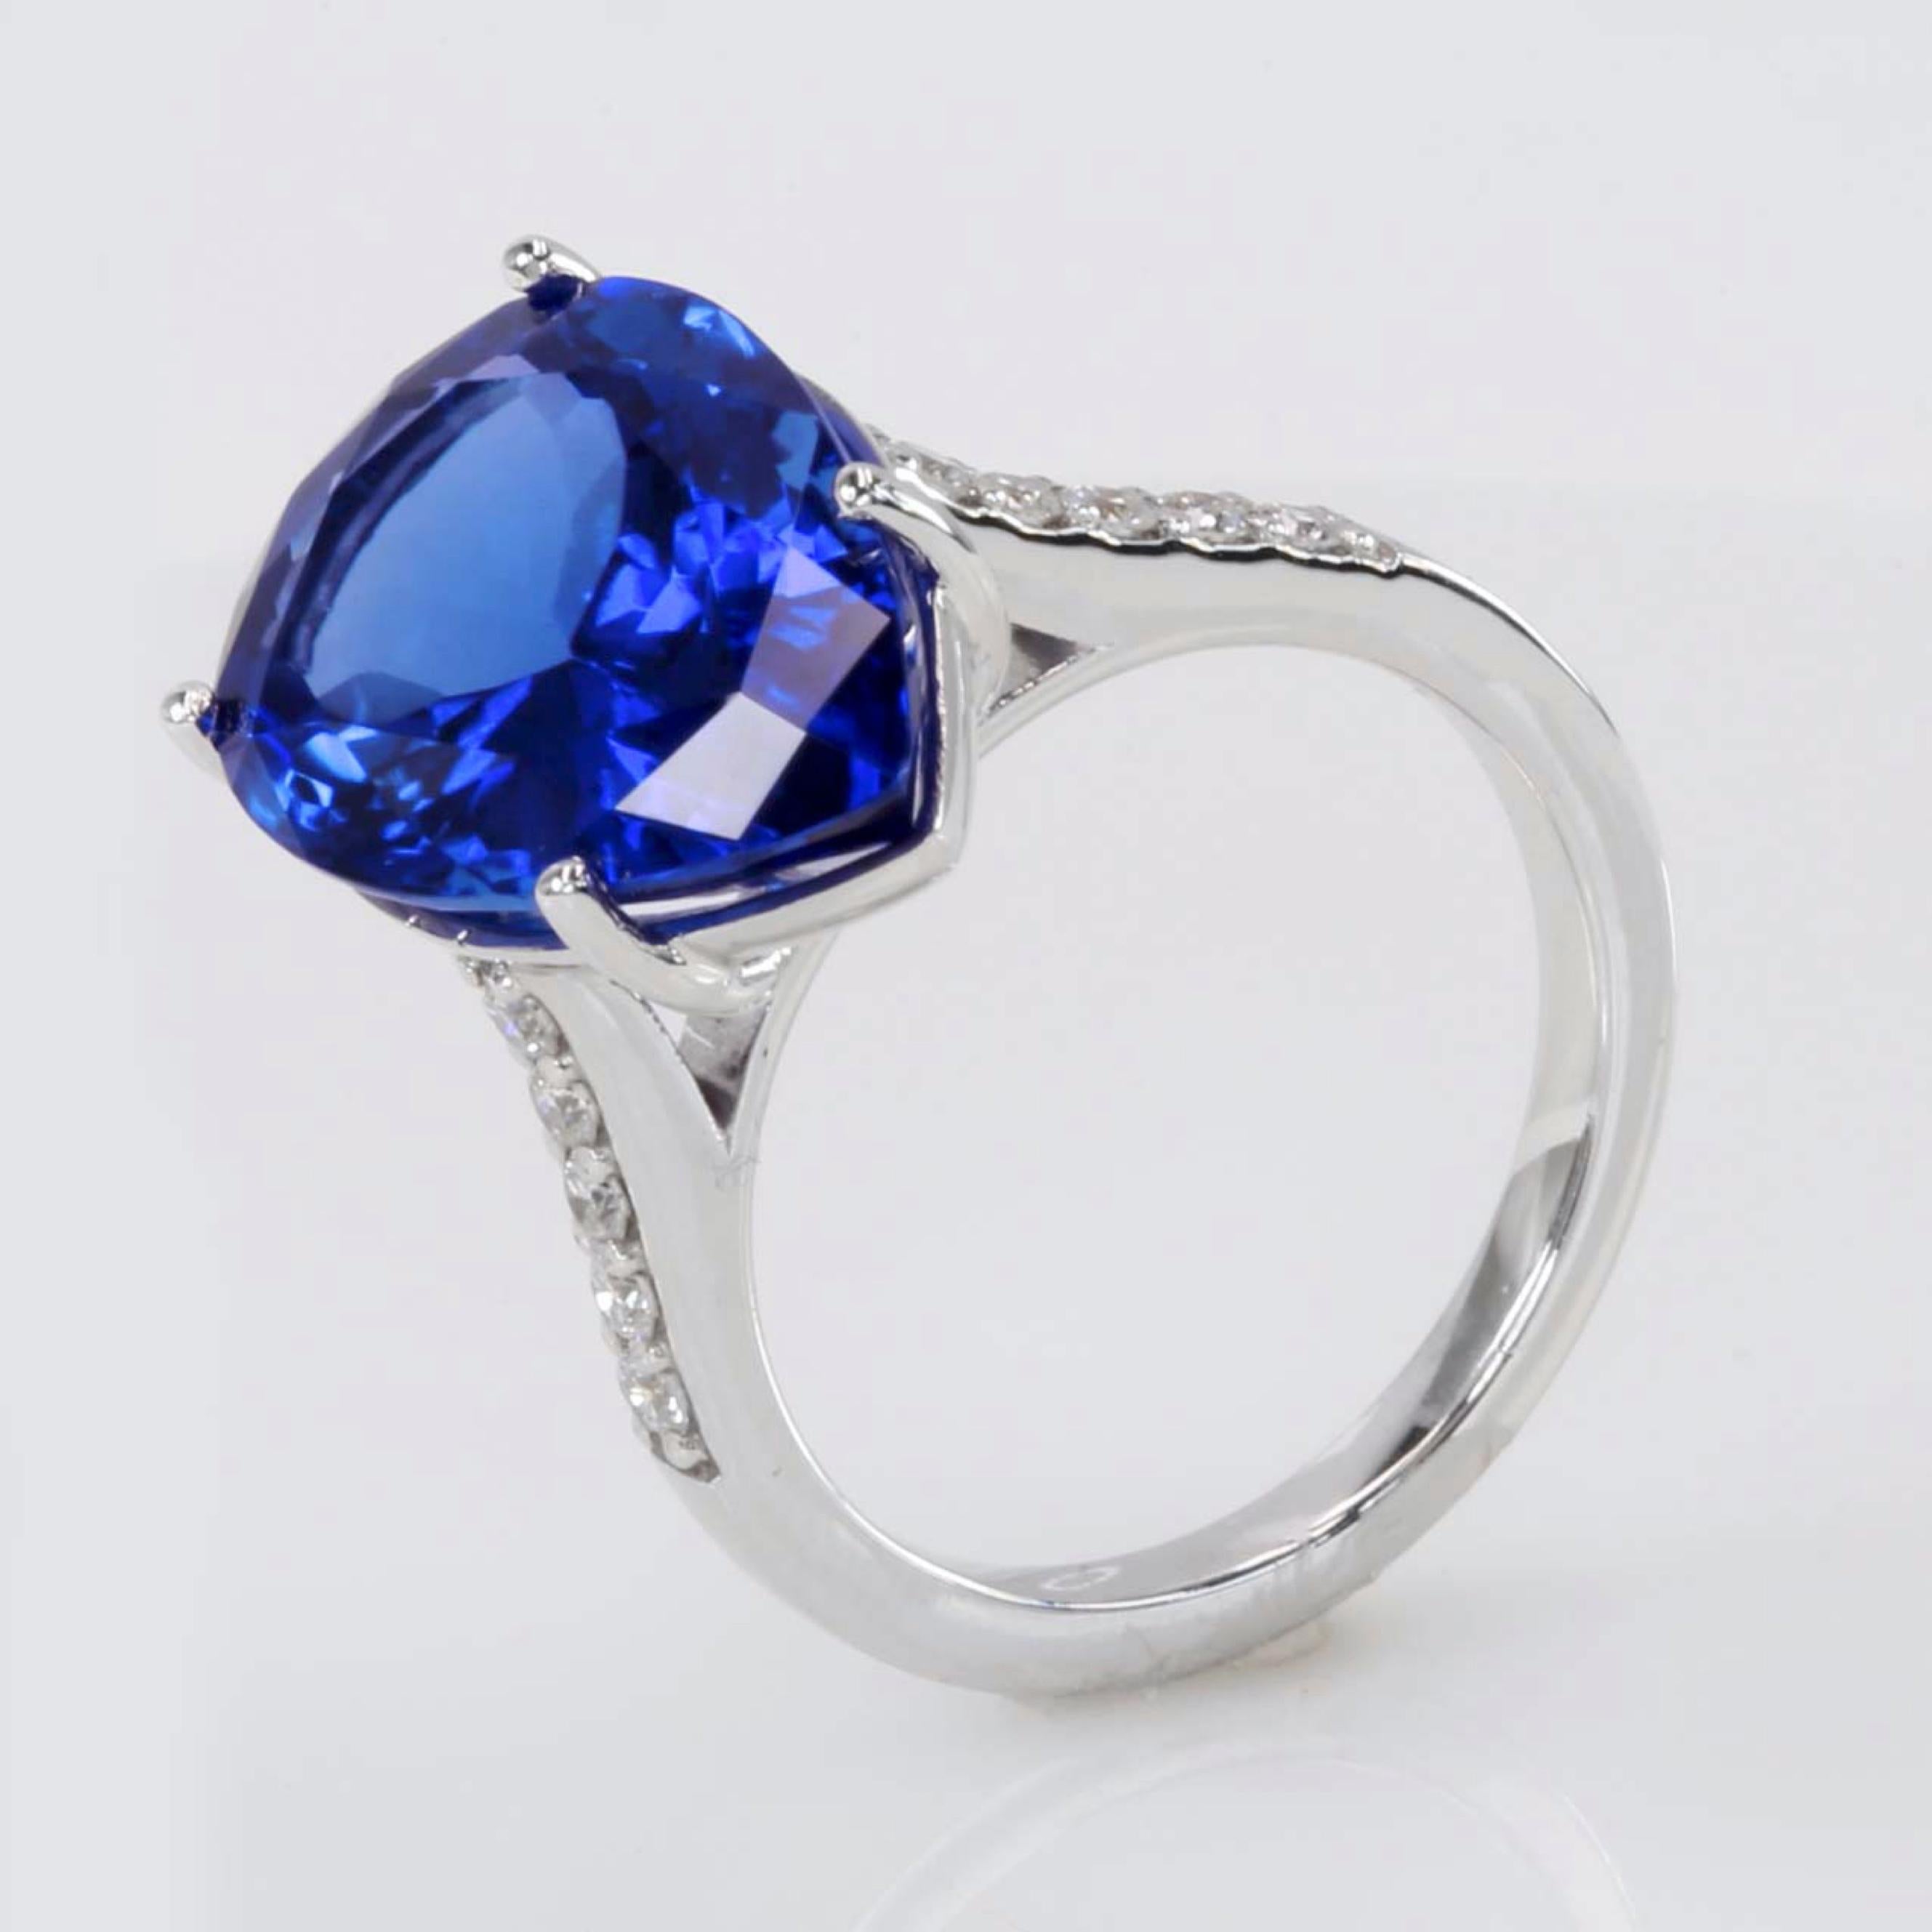 Pear Cut 9.23ct Tanzanite & 0.23ct Diamond Ring-Pear Shape-18KT Gold-GIA Certified-Rare For Sale